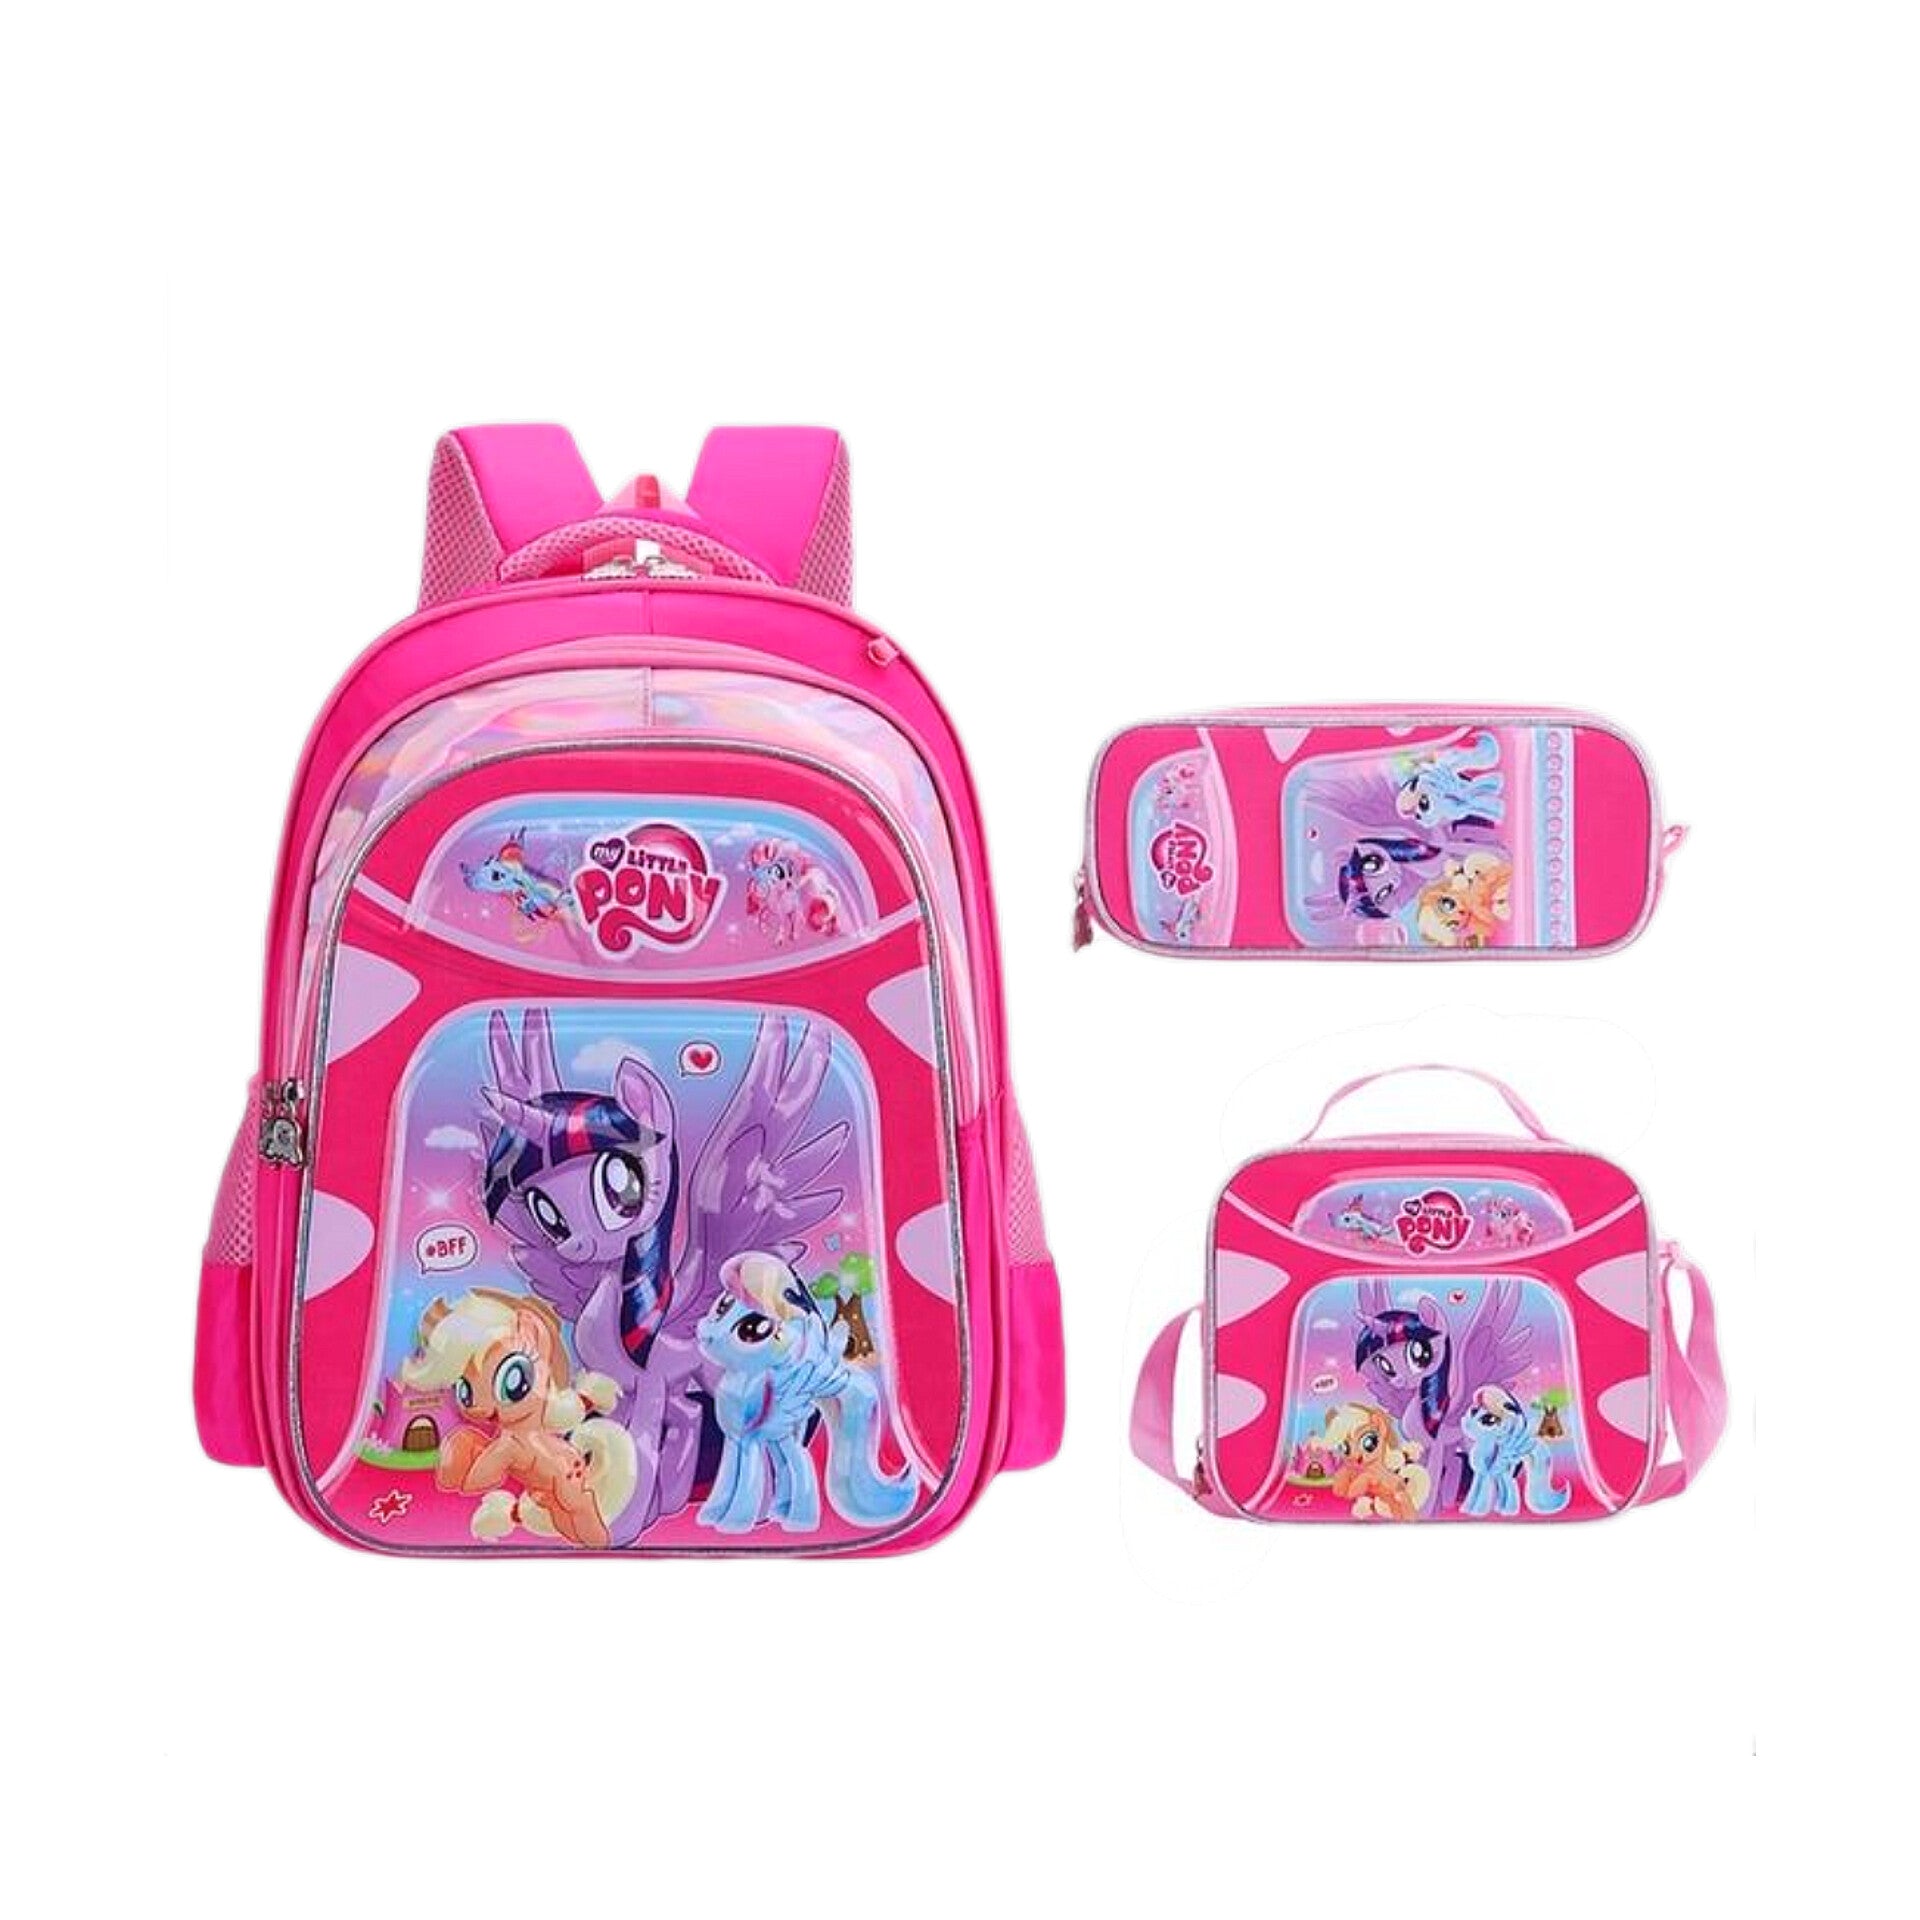 3D My Little Pony 3 in 1 Backpack Set - Diaper Yard Gh